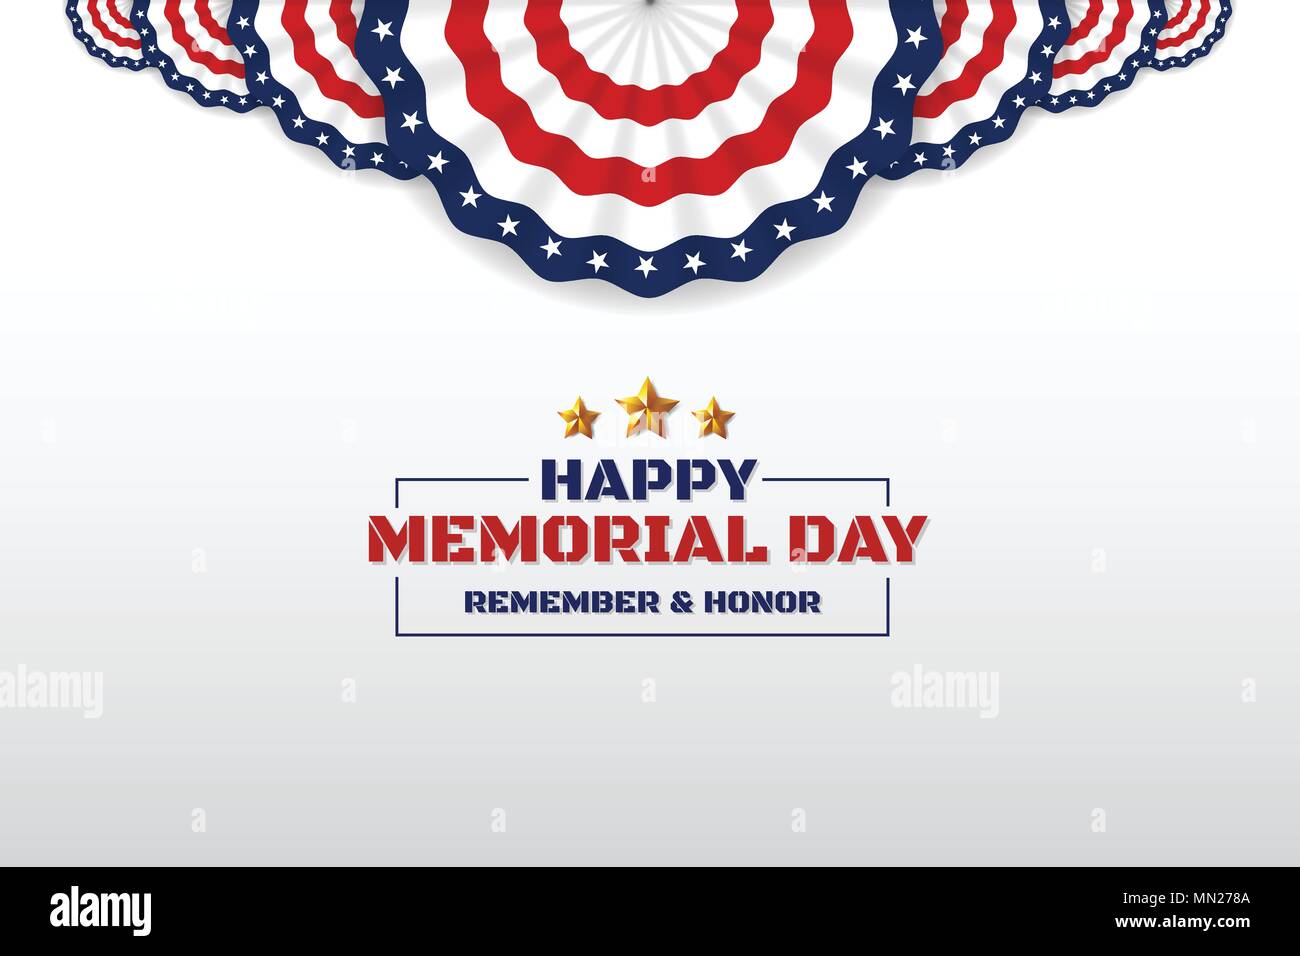 Happy Memorial Day Background Design With USA Circle Flag. Vector ...